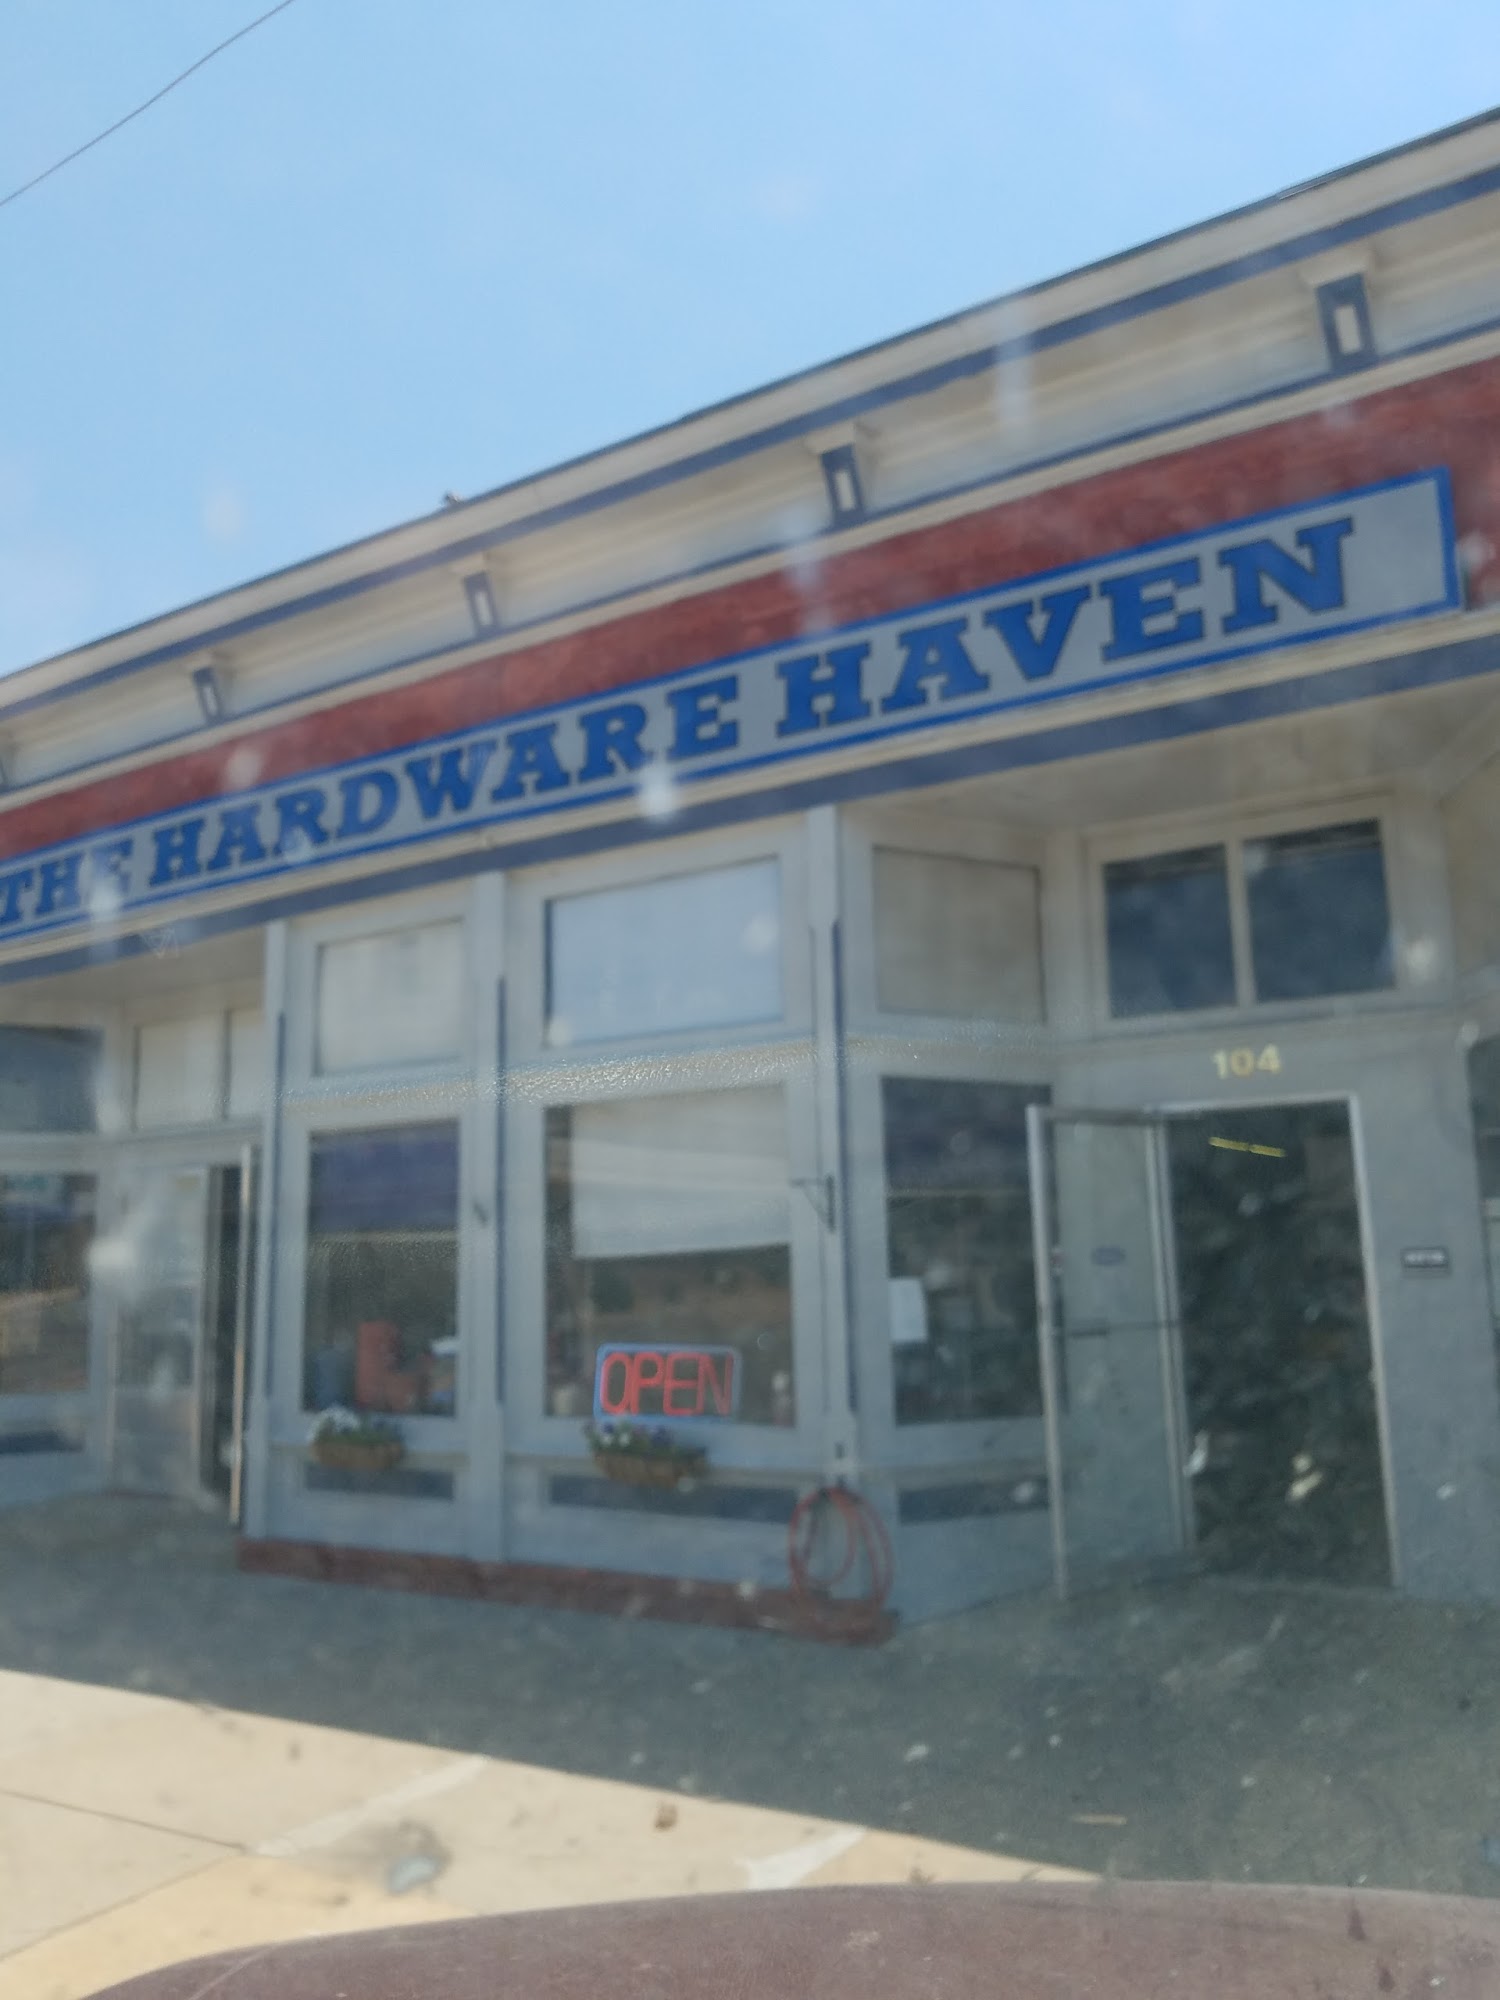 The Hardware Haven